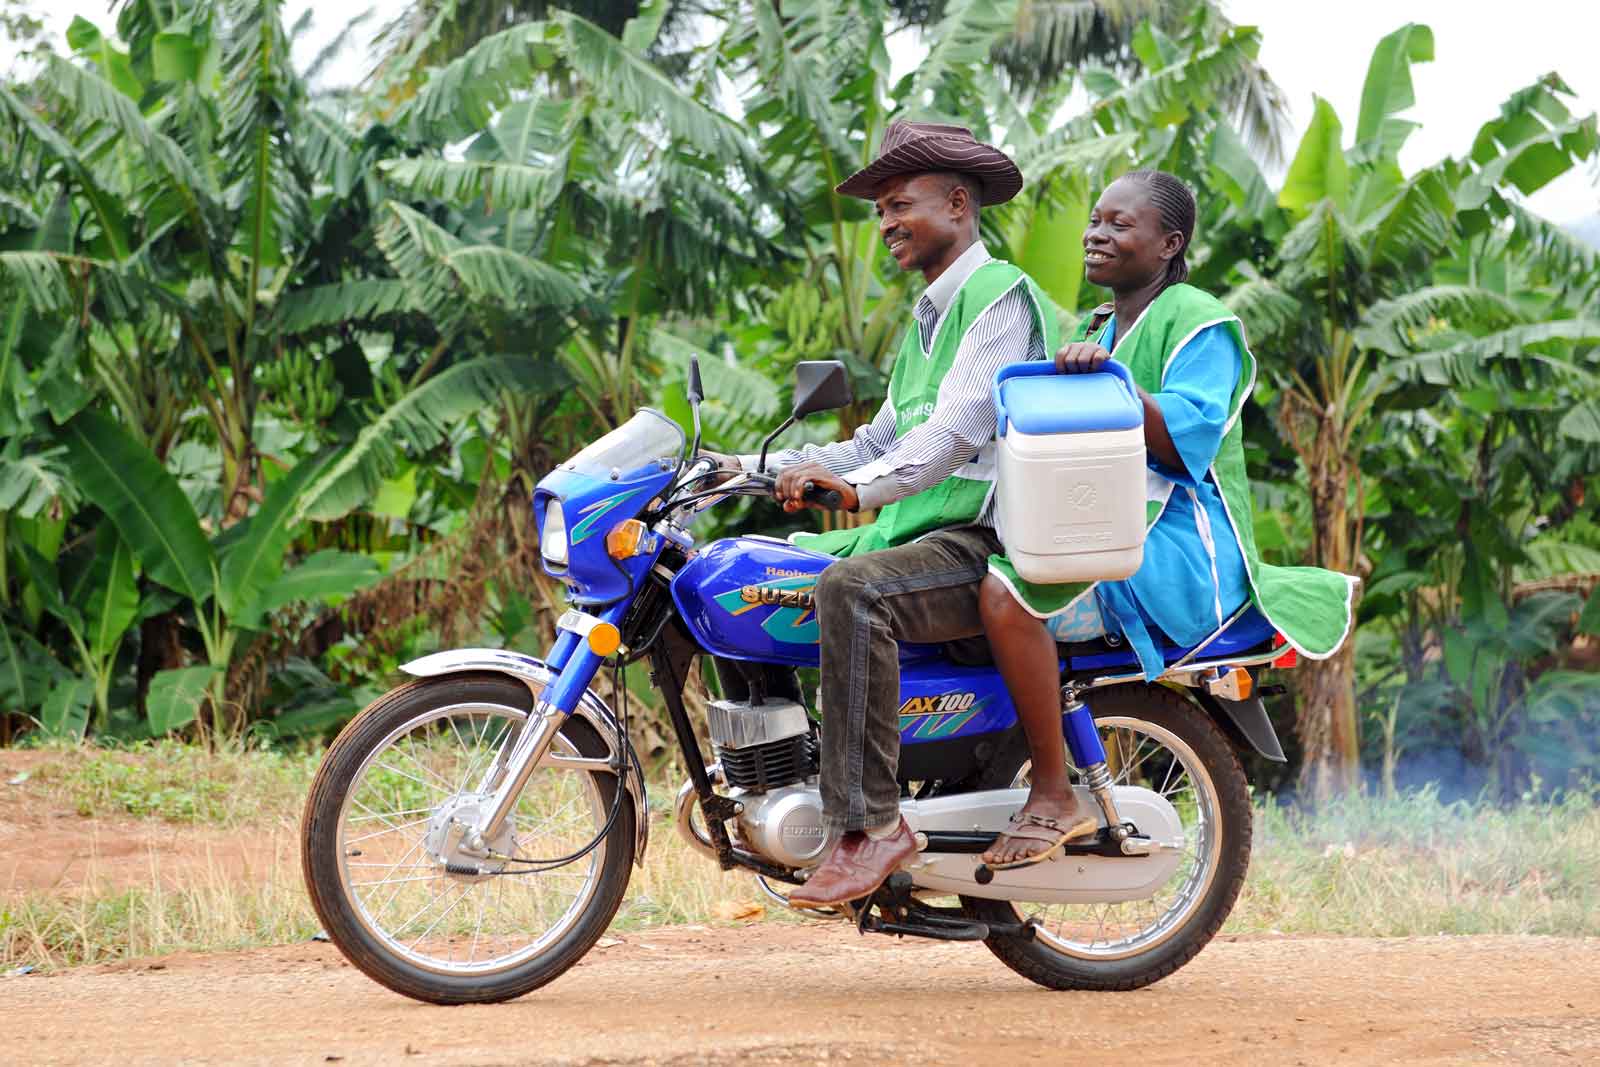  Immunisation outreach nurse Agnes Akinbiodun and health worker Gabriel Ikoro travel by motorbike for the first leg of their journey to deliver vaccines to remote communities in Ondo State. In a second step, they hike and scale boulder- strewn countryside to reach the villages.